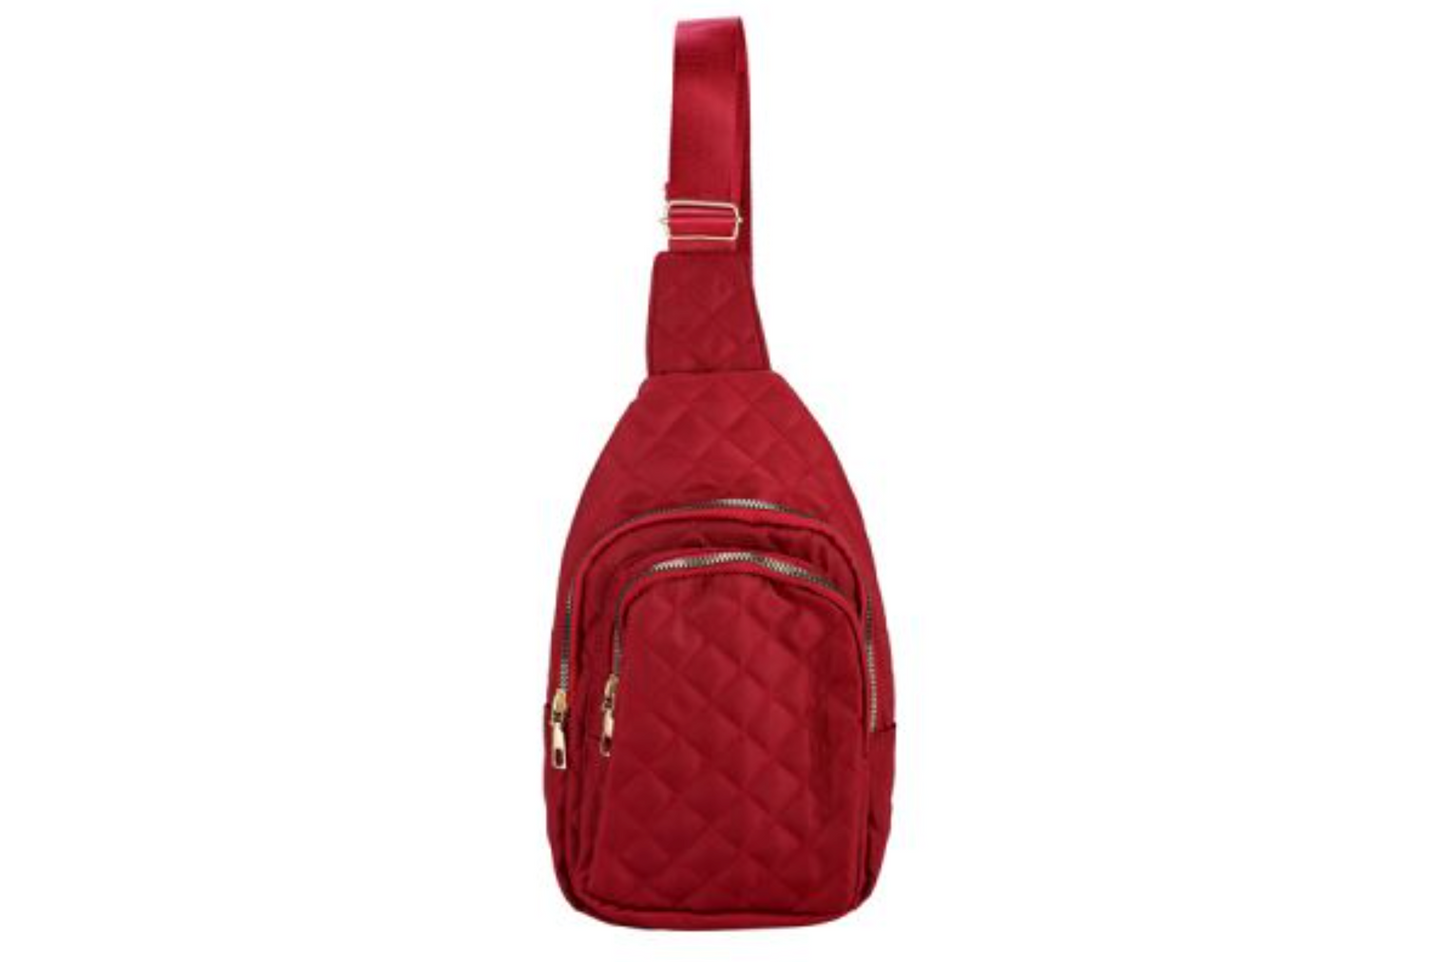 The Quilted Sling Bag